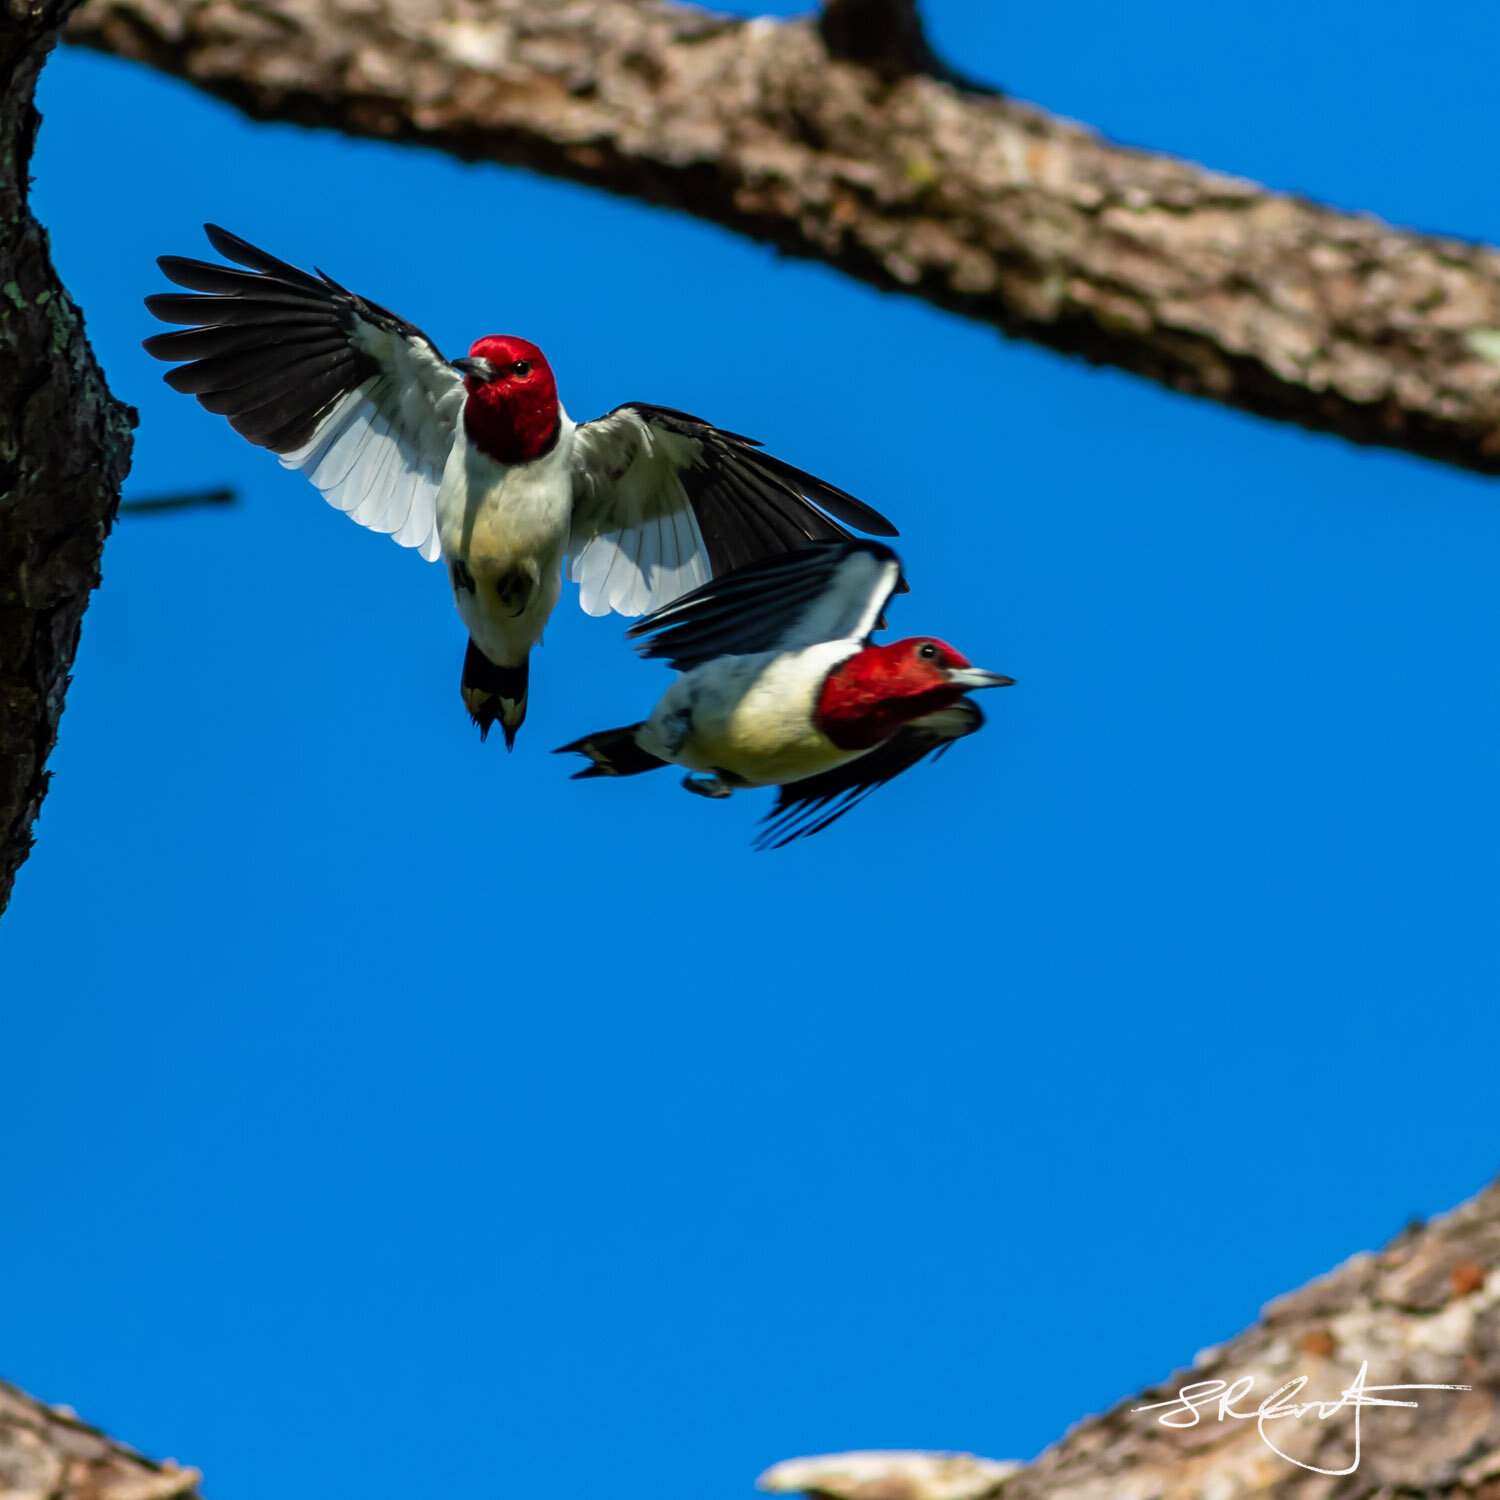 Two Red Heads in flight